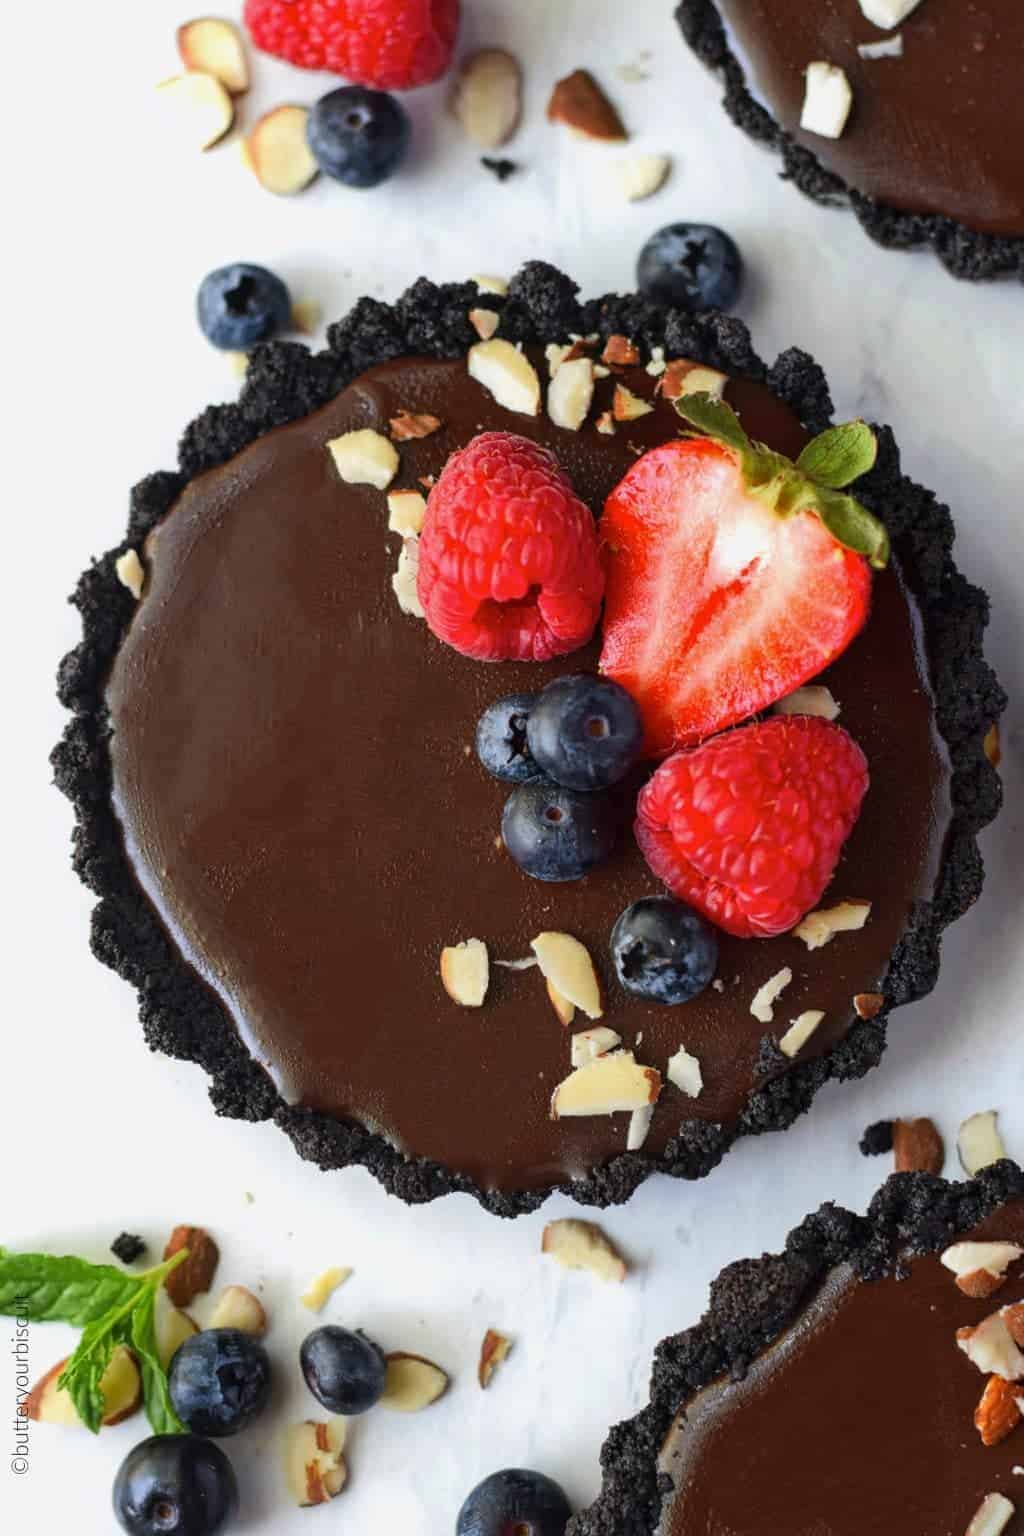 No bake chocolate mini tarts with strawberries, blueberries, rasberries and almond slivers on top